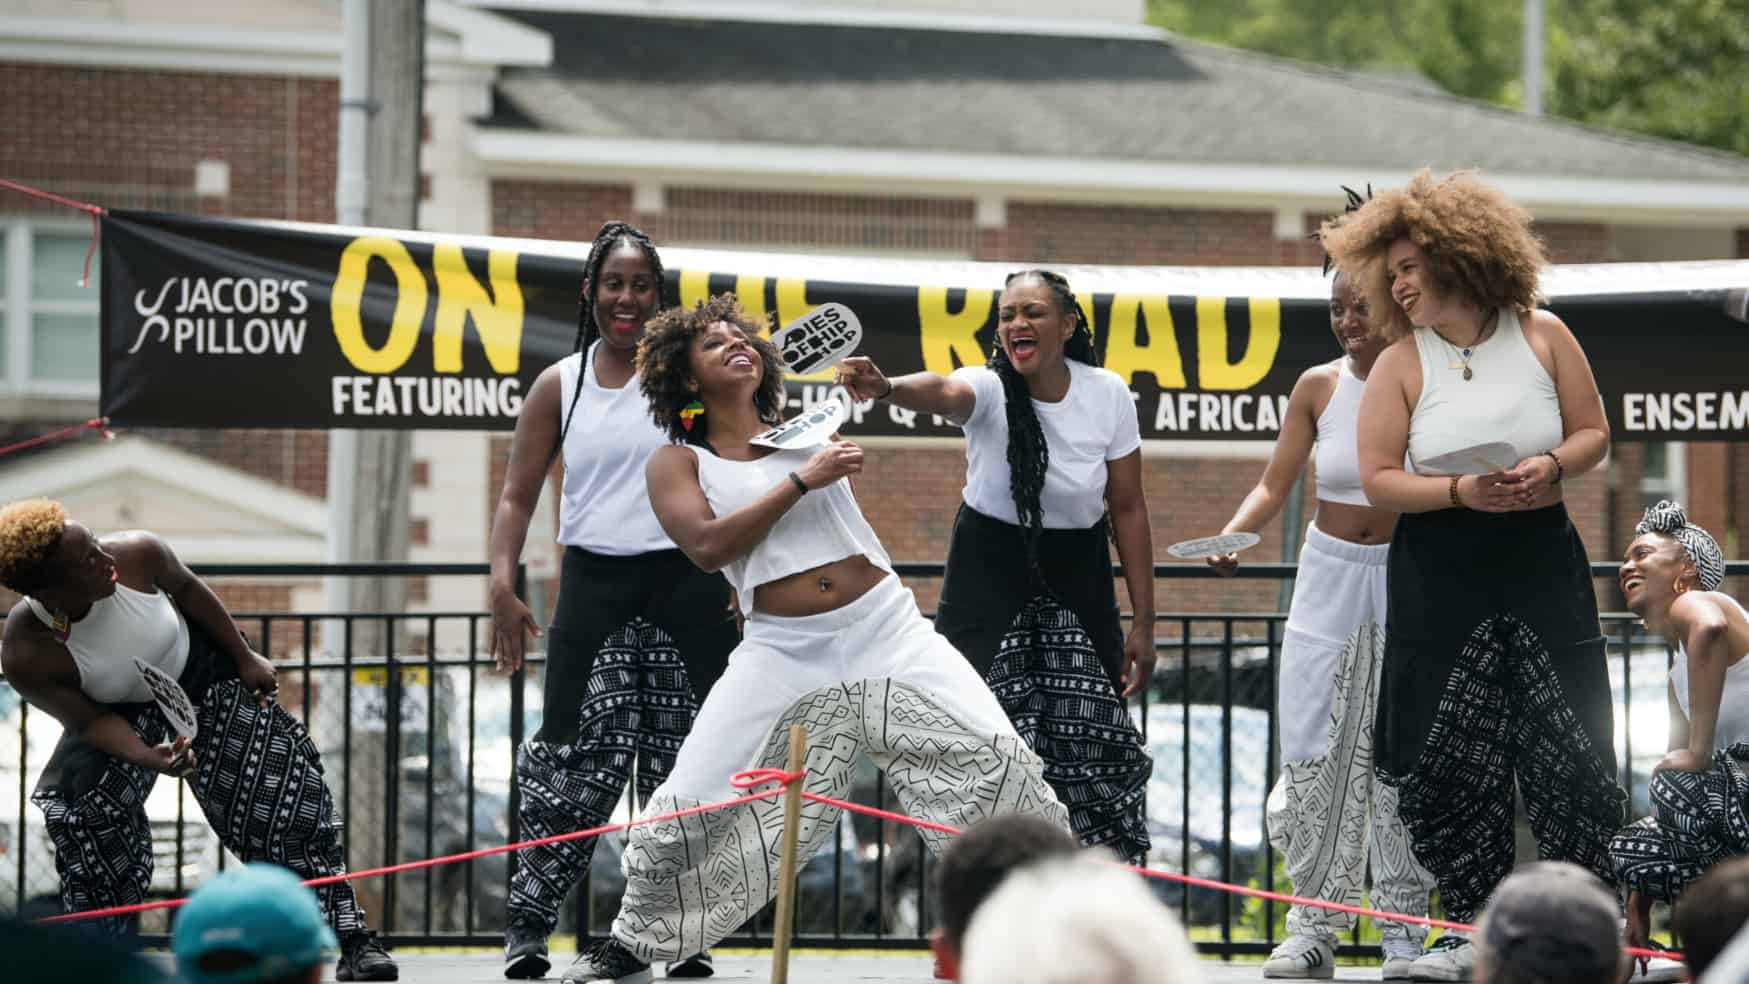 LayeRhythm will combine live musicians and freestyle dancers to create dance from a diverse cultural palette at Pittsfield's Third Thursday celebration. Press photo courtesy of Jacobs Pillow.